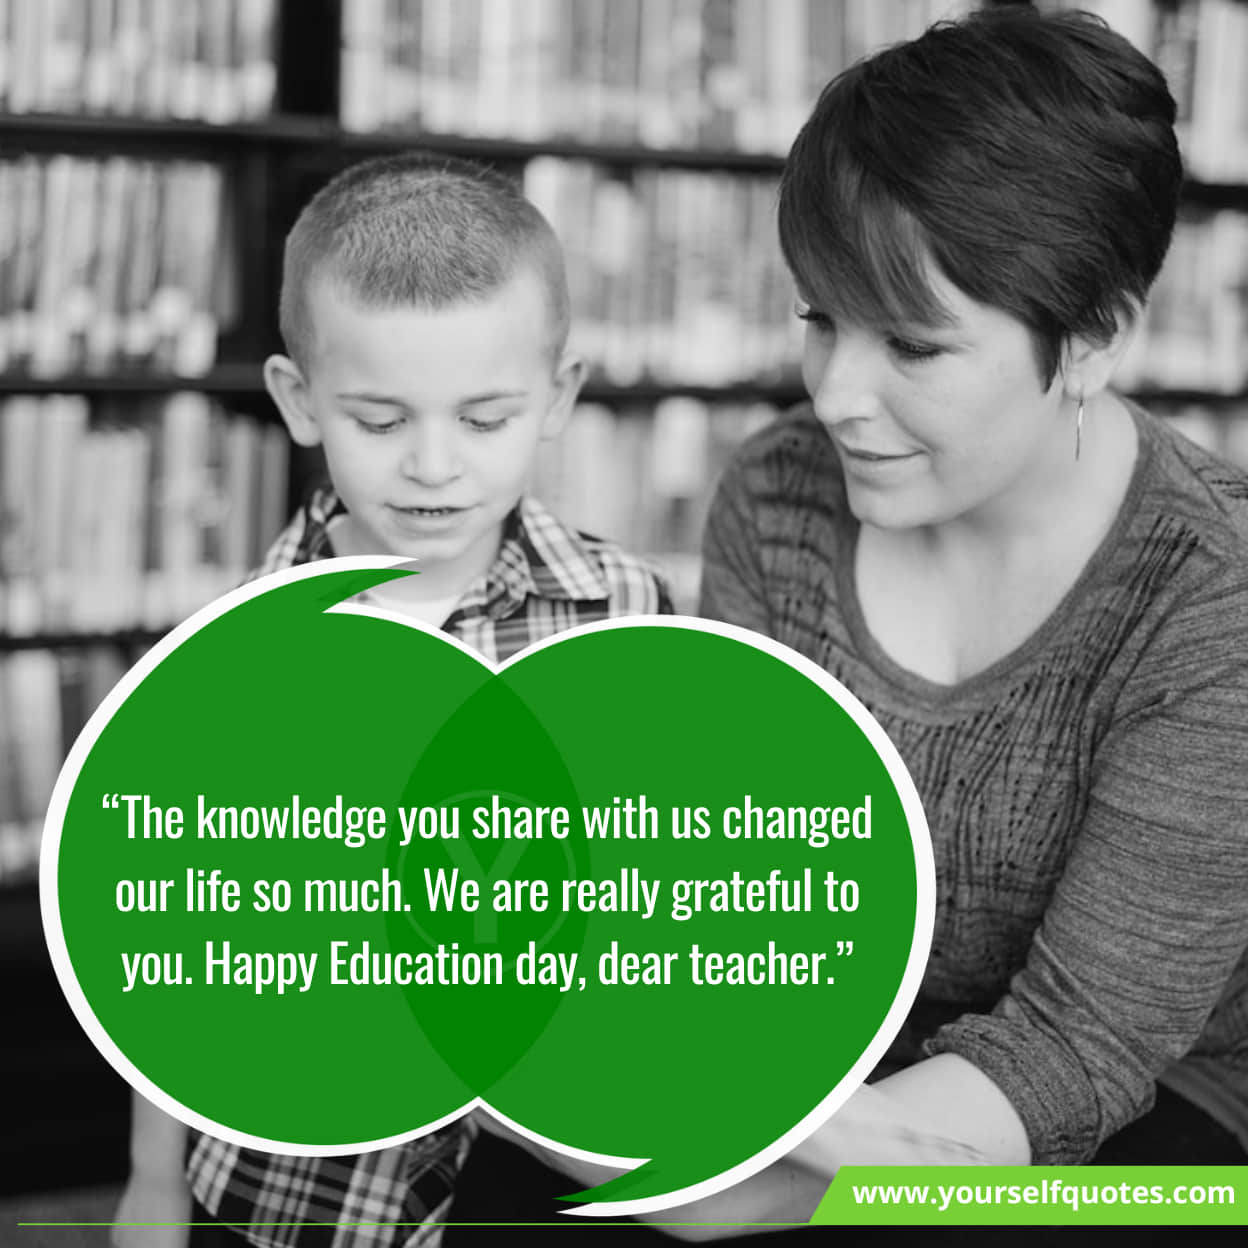 Best Famous Education Day Wishes, Quotes & Messages